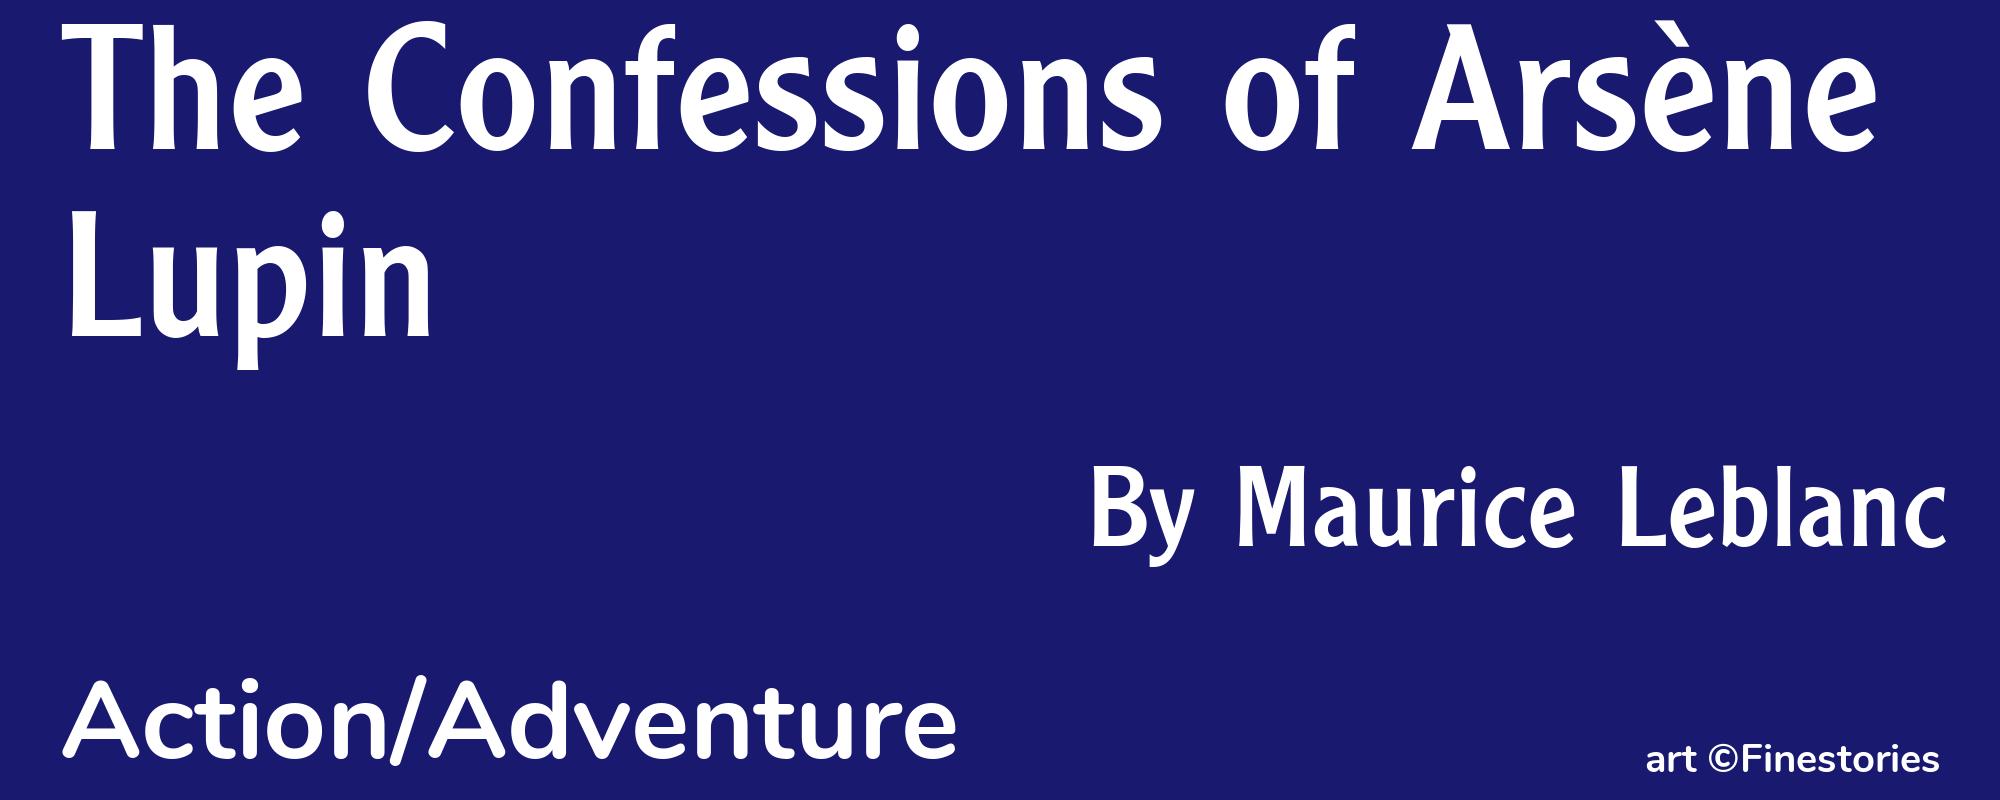 The Confessions of Arsène Lupin - Cover